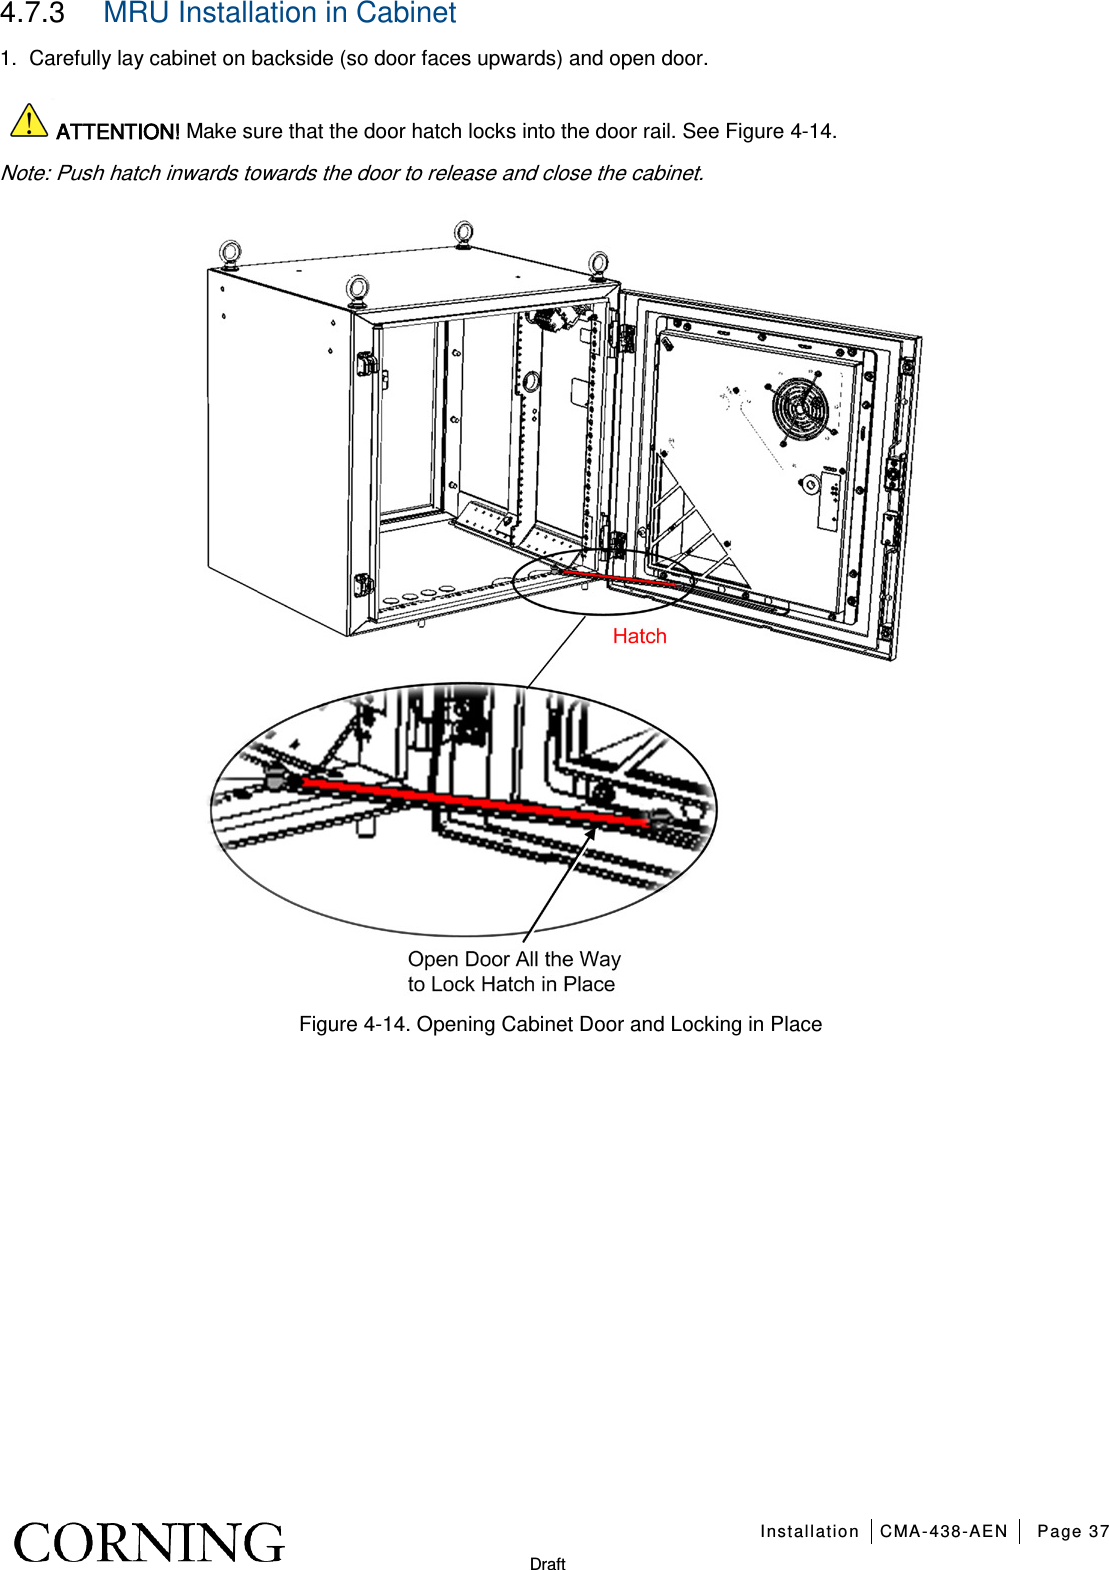   Installation CMA-438-AEN Page 37   Draft 4.7.3  MRU Installation in Cabinet 1.  Carefully lay cabinet on backside (so door faces upwards) and open door.   ATTENTION! Make sure that the door hatch locks into the door rail. See Figure  4-14. Note: Push hatch inwards towards the door to release and close the cabinet.  Figure  4-14. Opening Cabinet Door and Locking in Place    